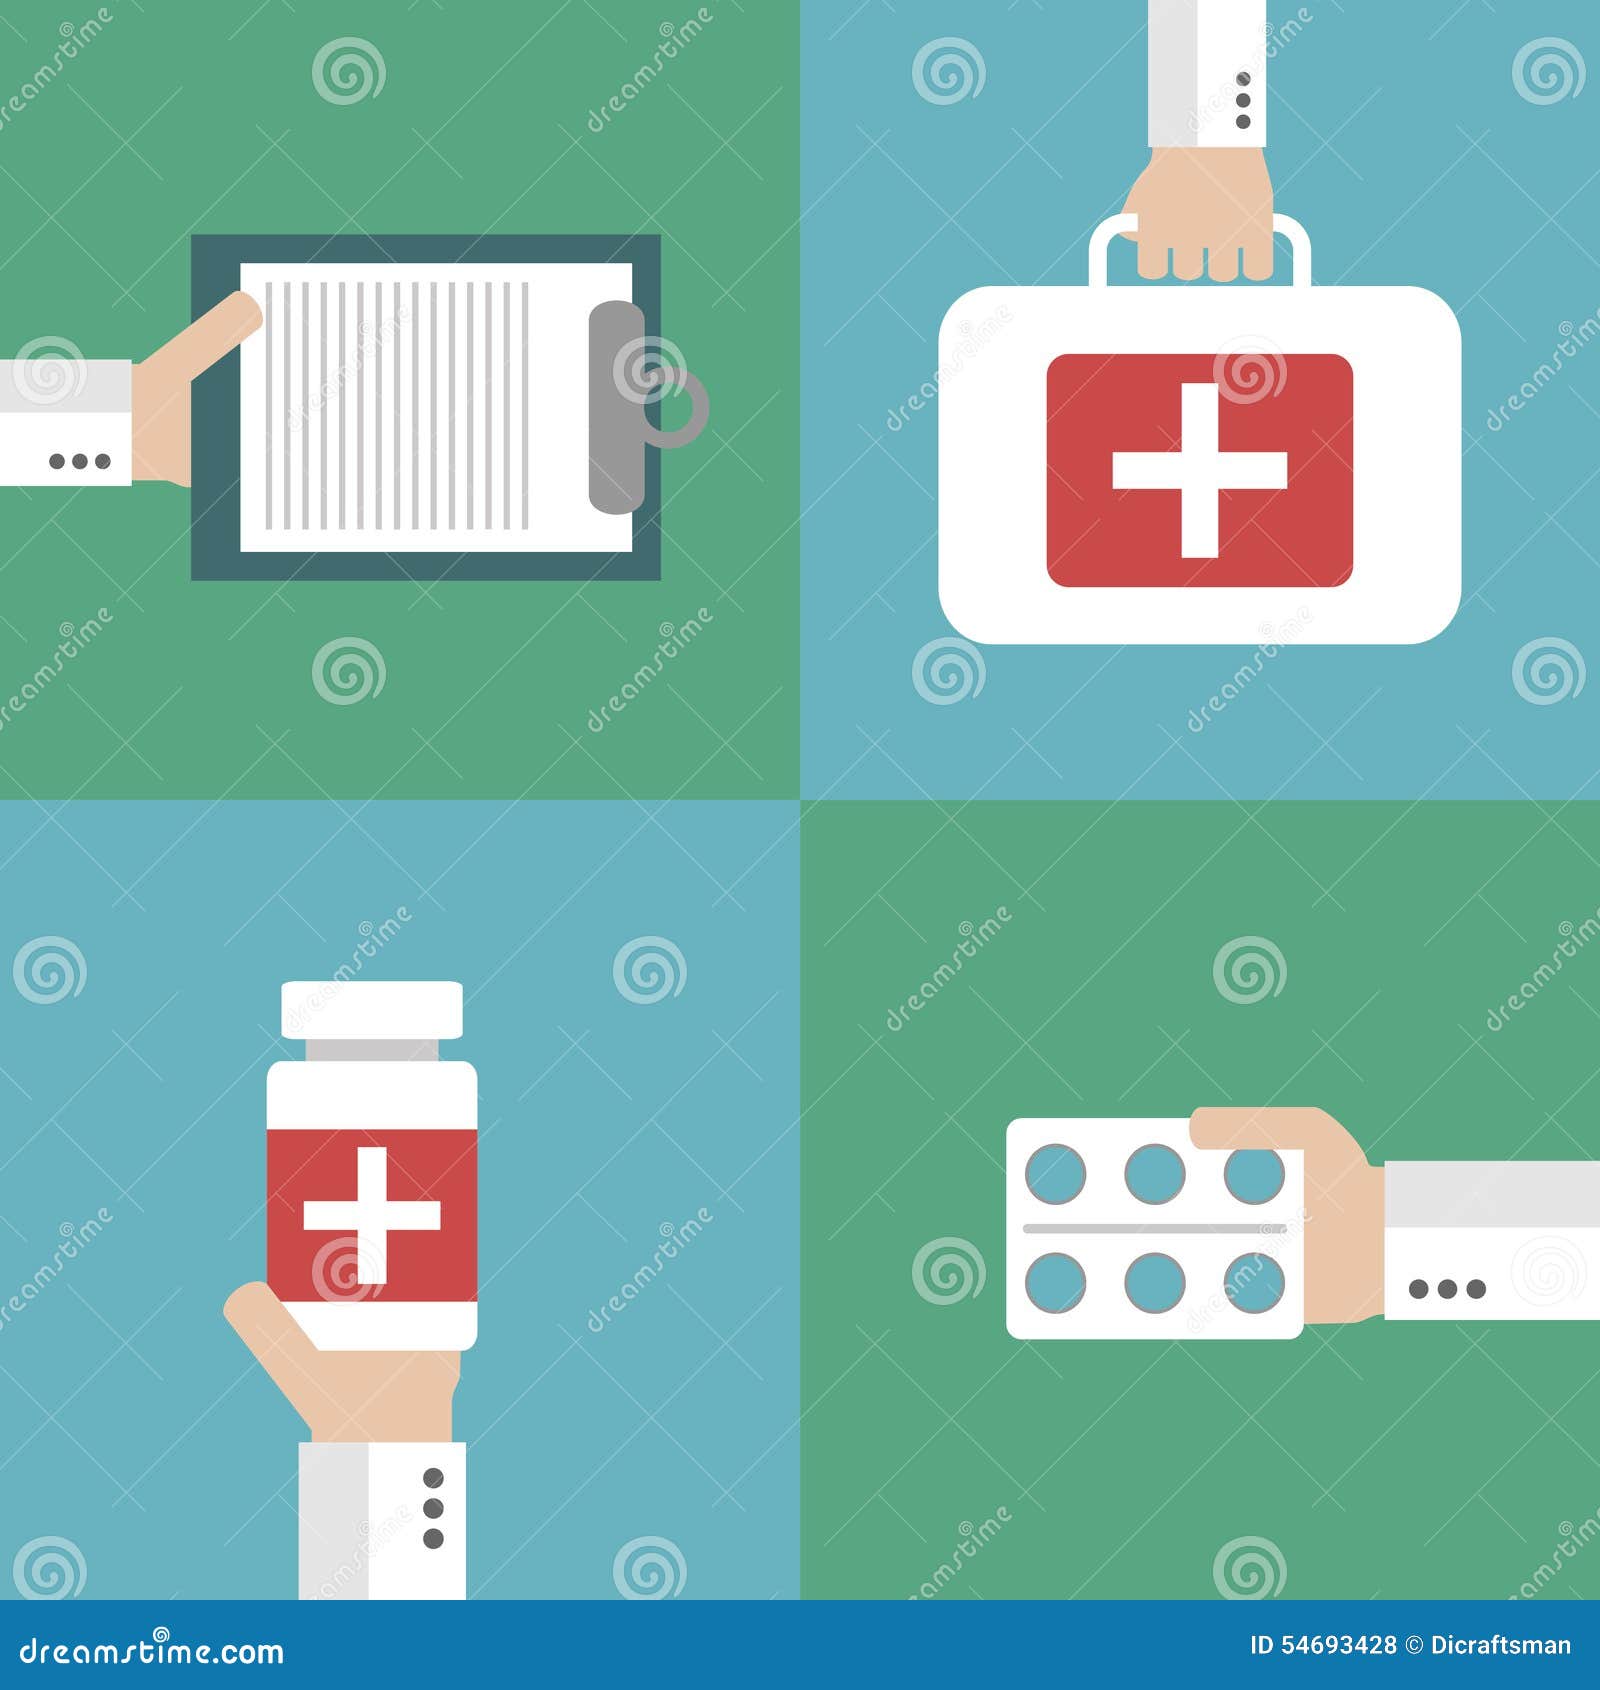 Healthcare Vector, Flat Design Style Stock Vector - Illustration of ...